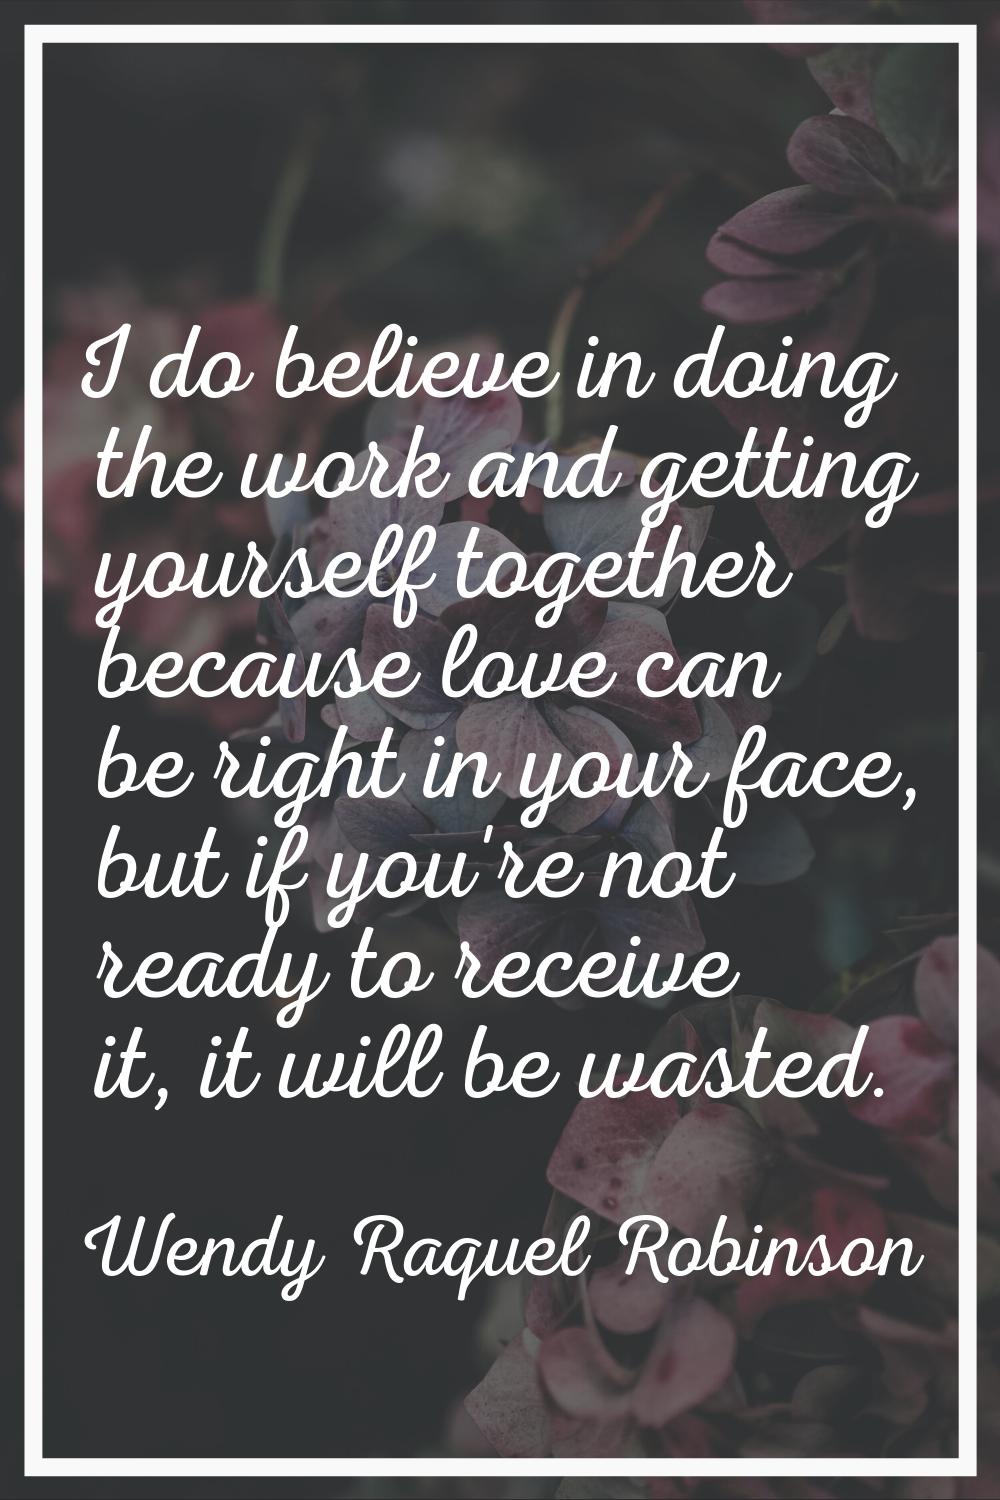 I do believe in doing the work and getting yourself together because love can be right in your face